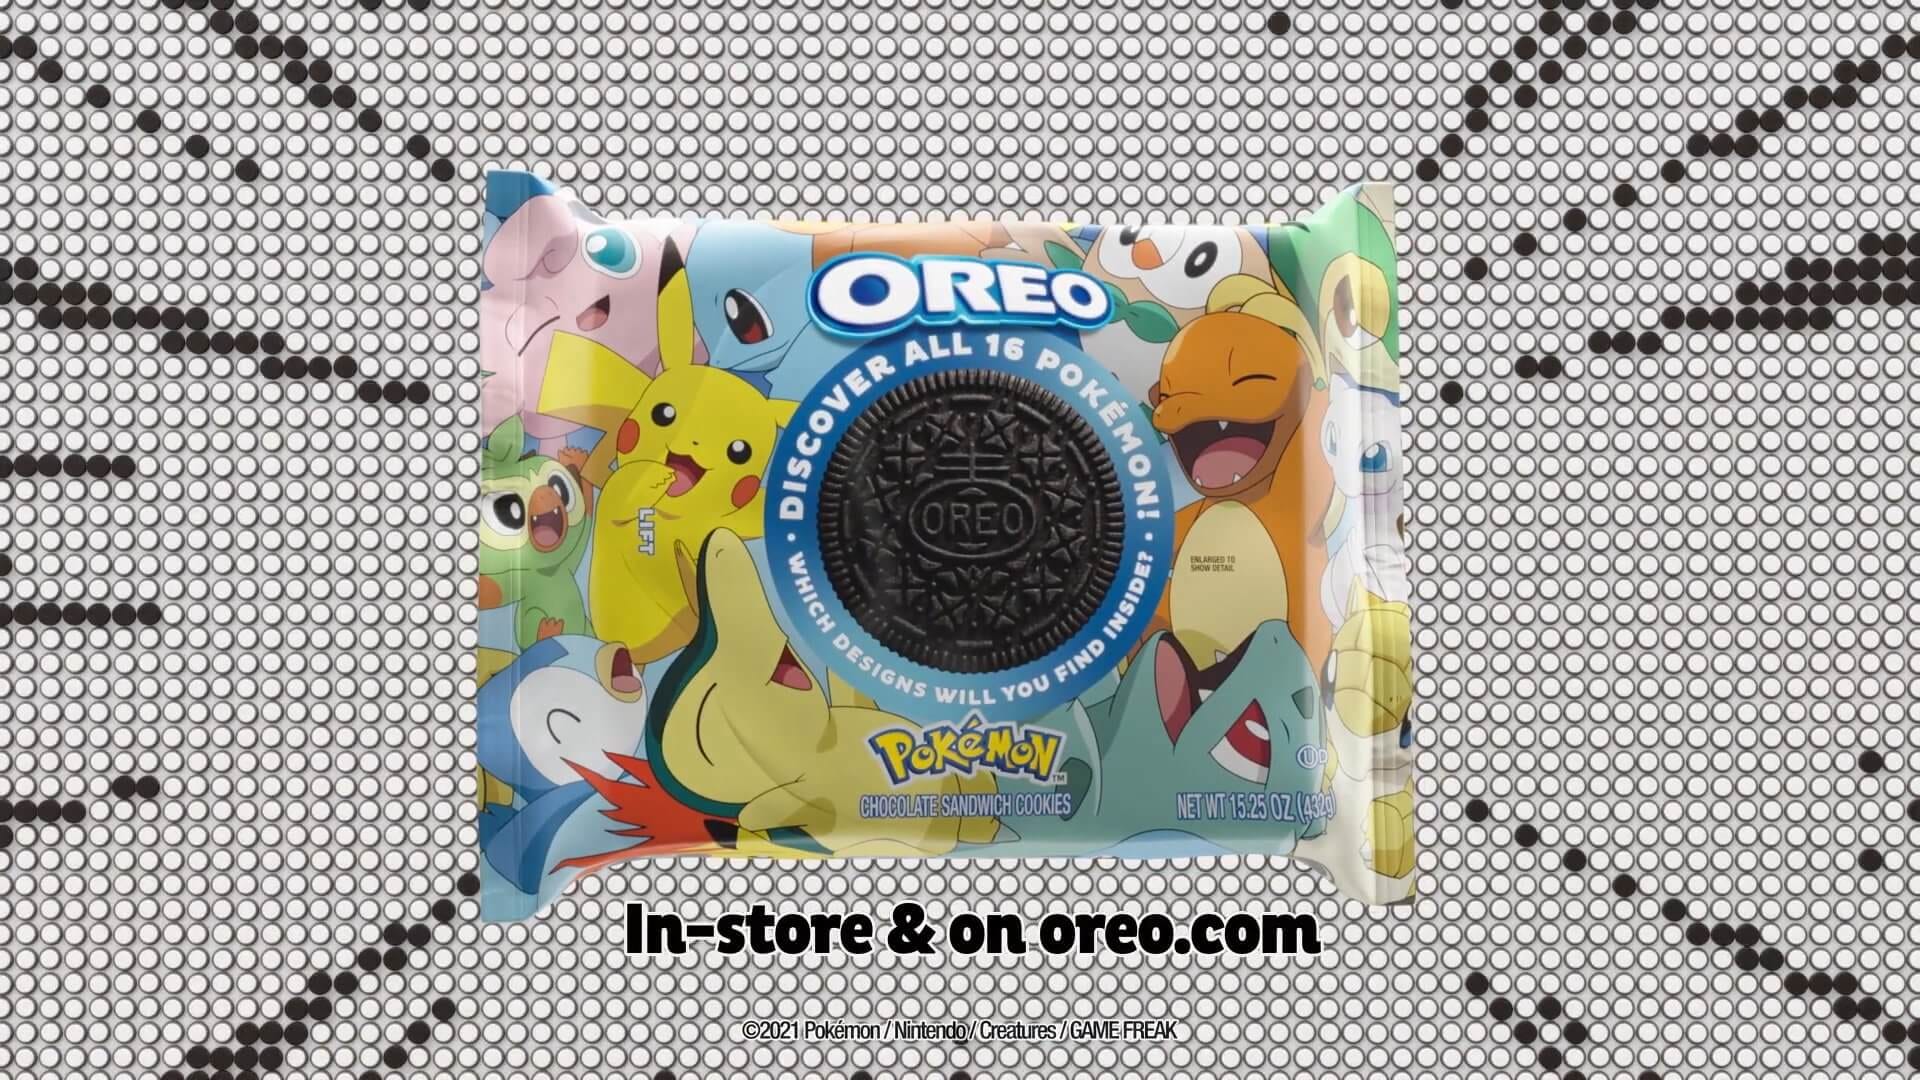 A still from the OREO Pokemon trailer, featuring the package for the cookies.